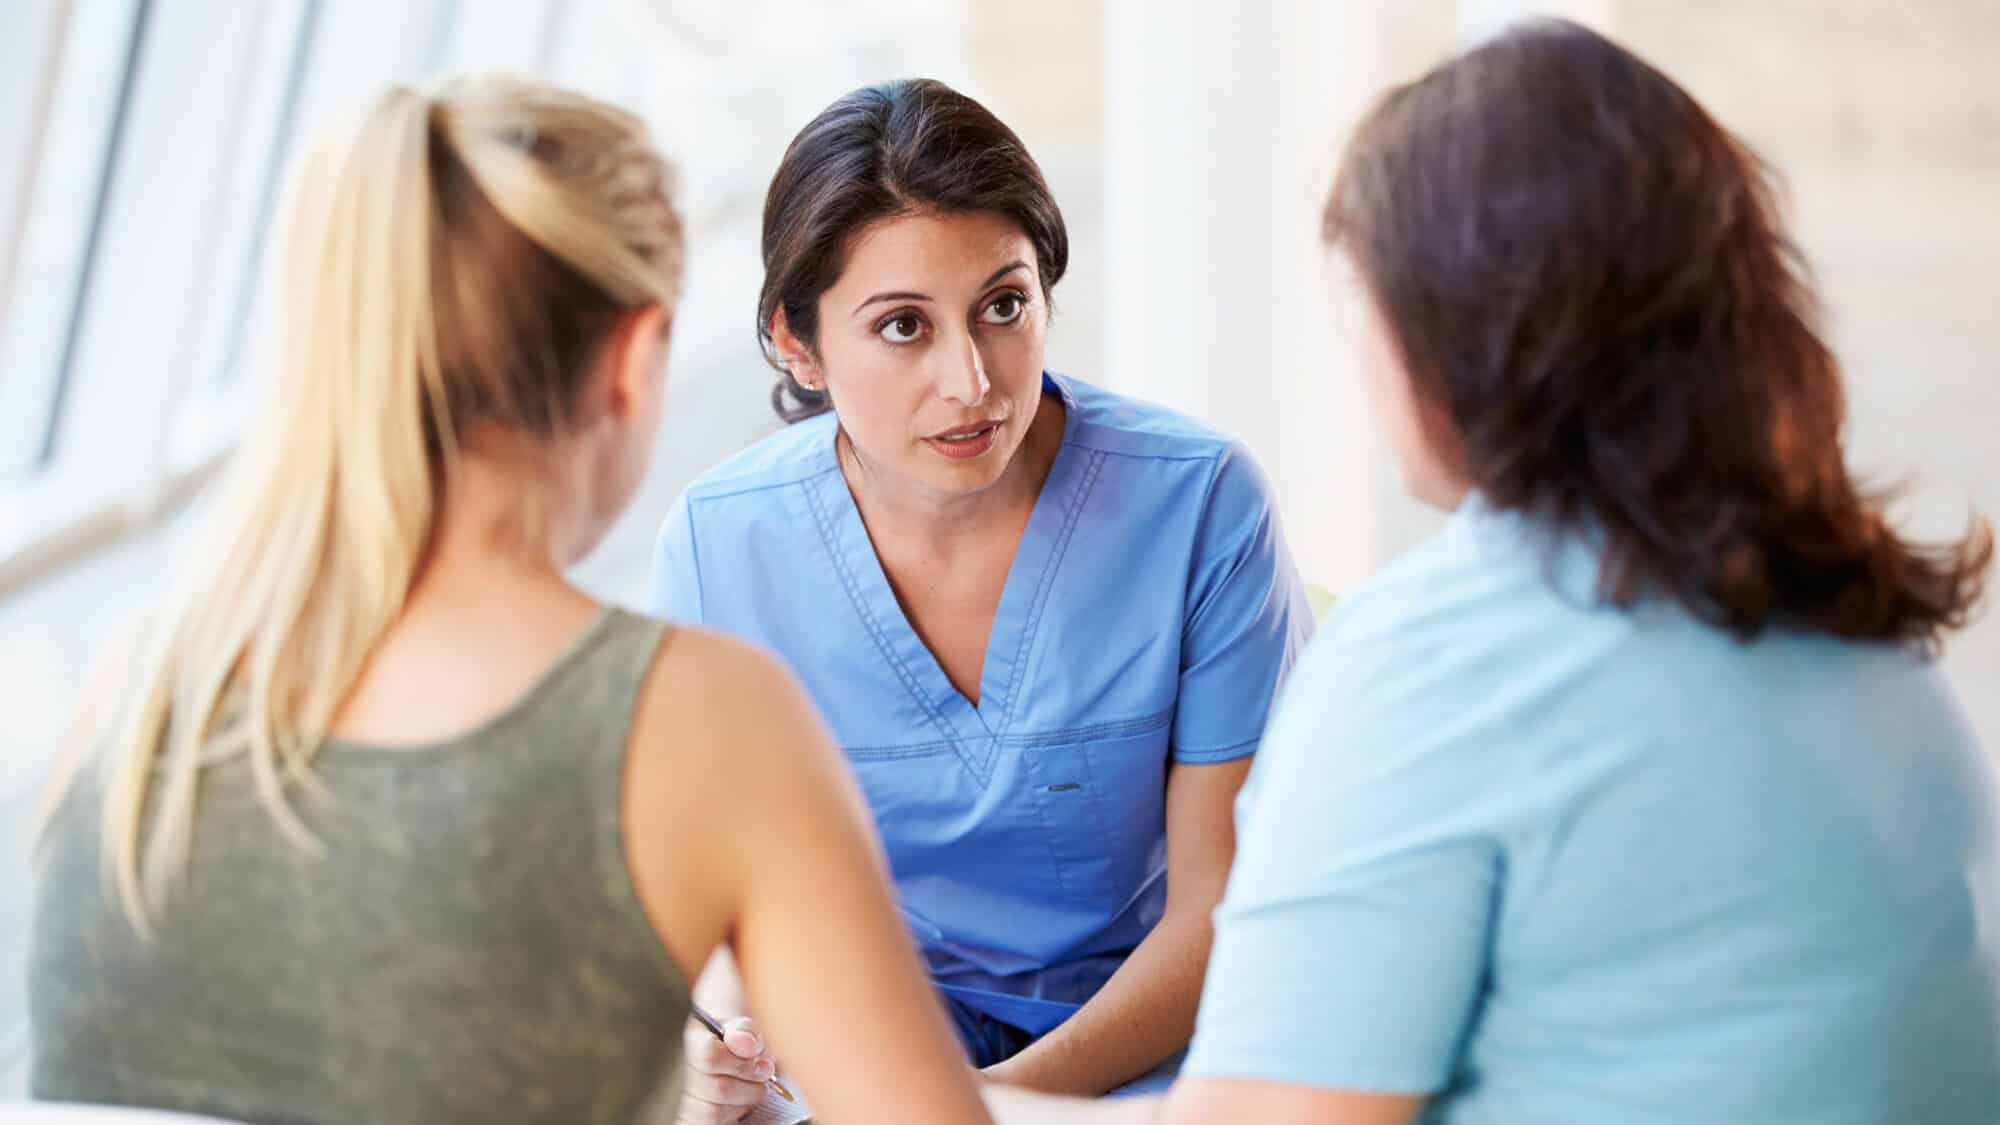 Registered Nurse offers family planning information and support to a teenager and her mother.